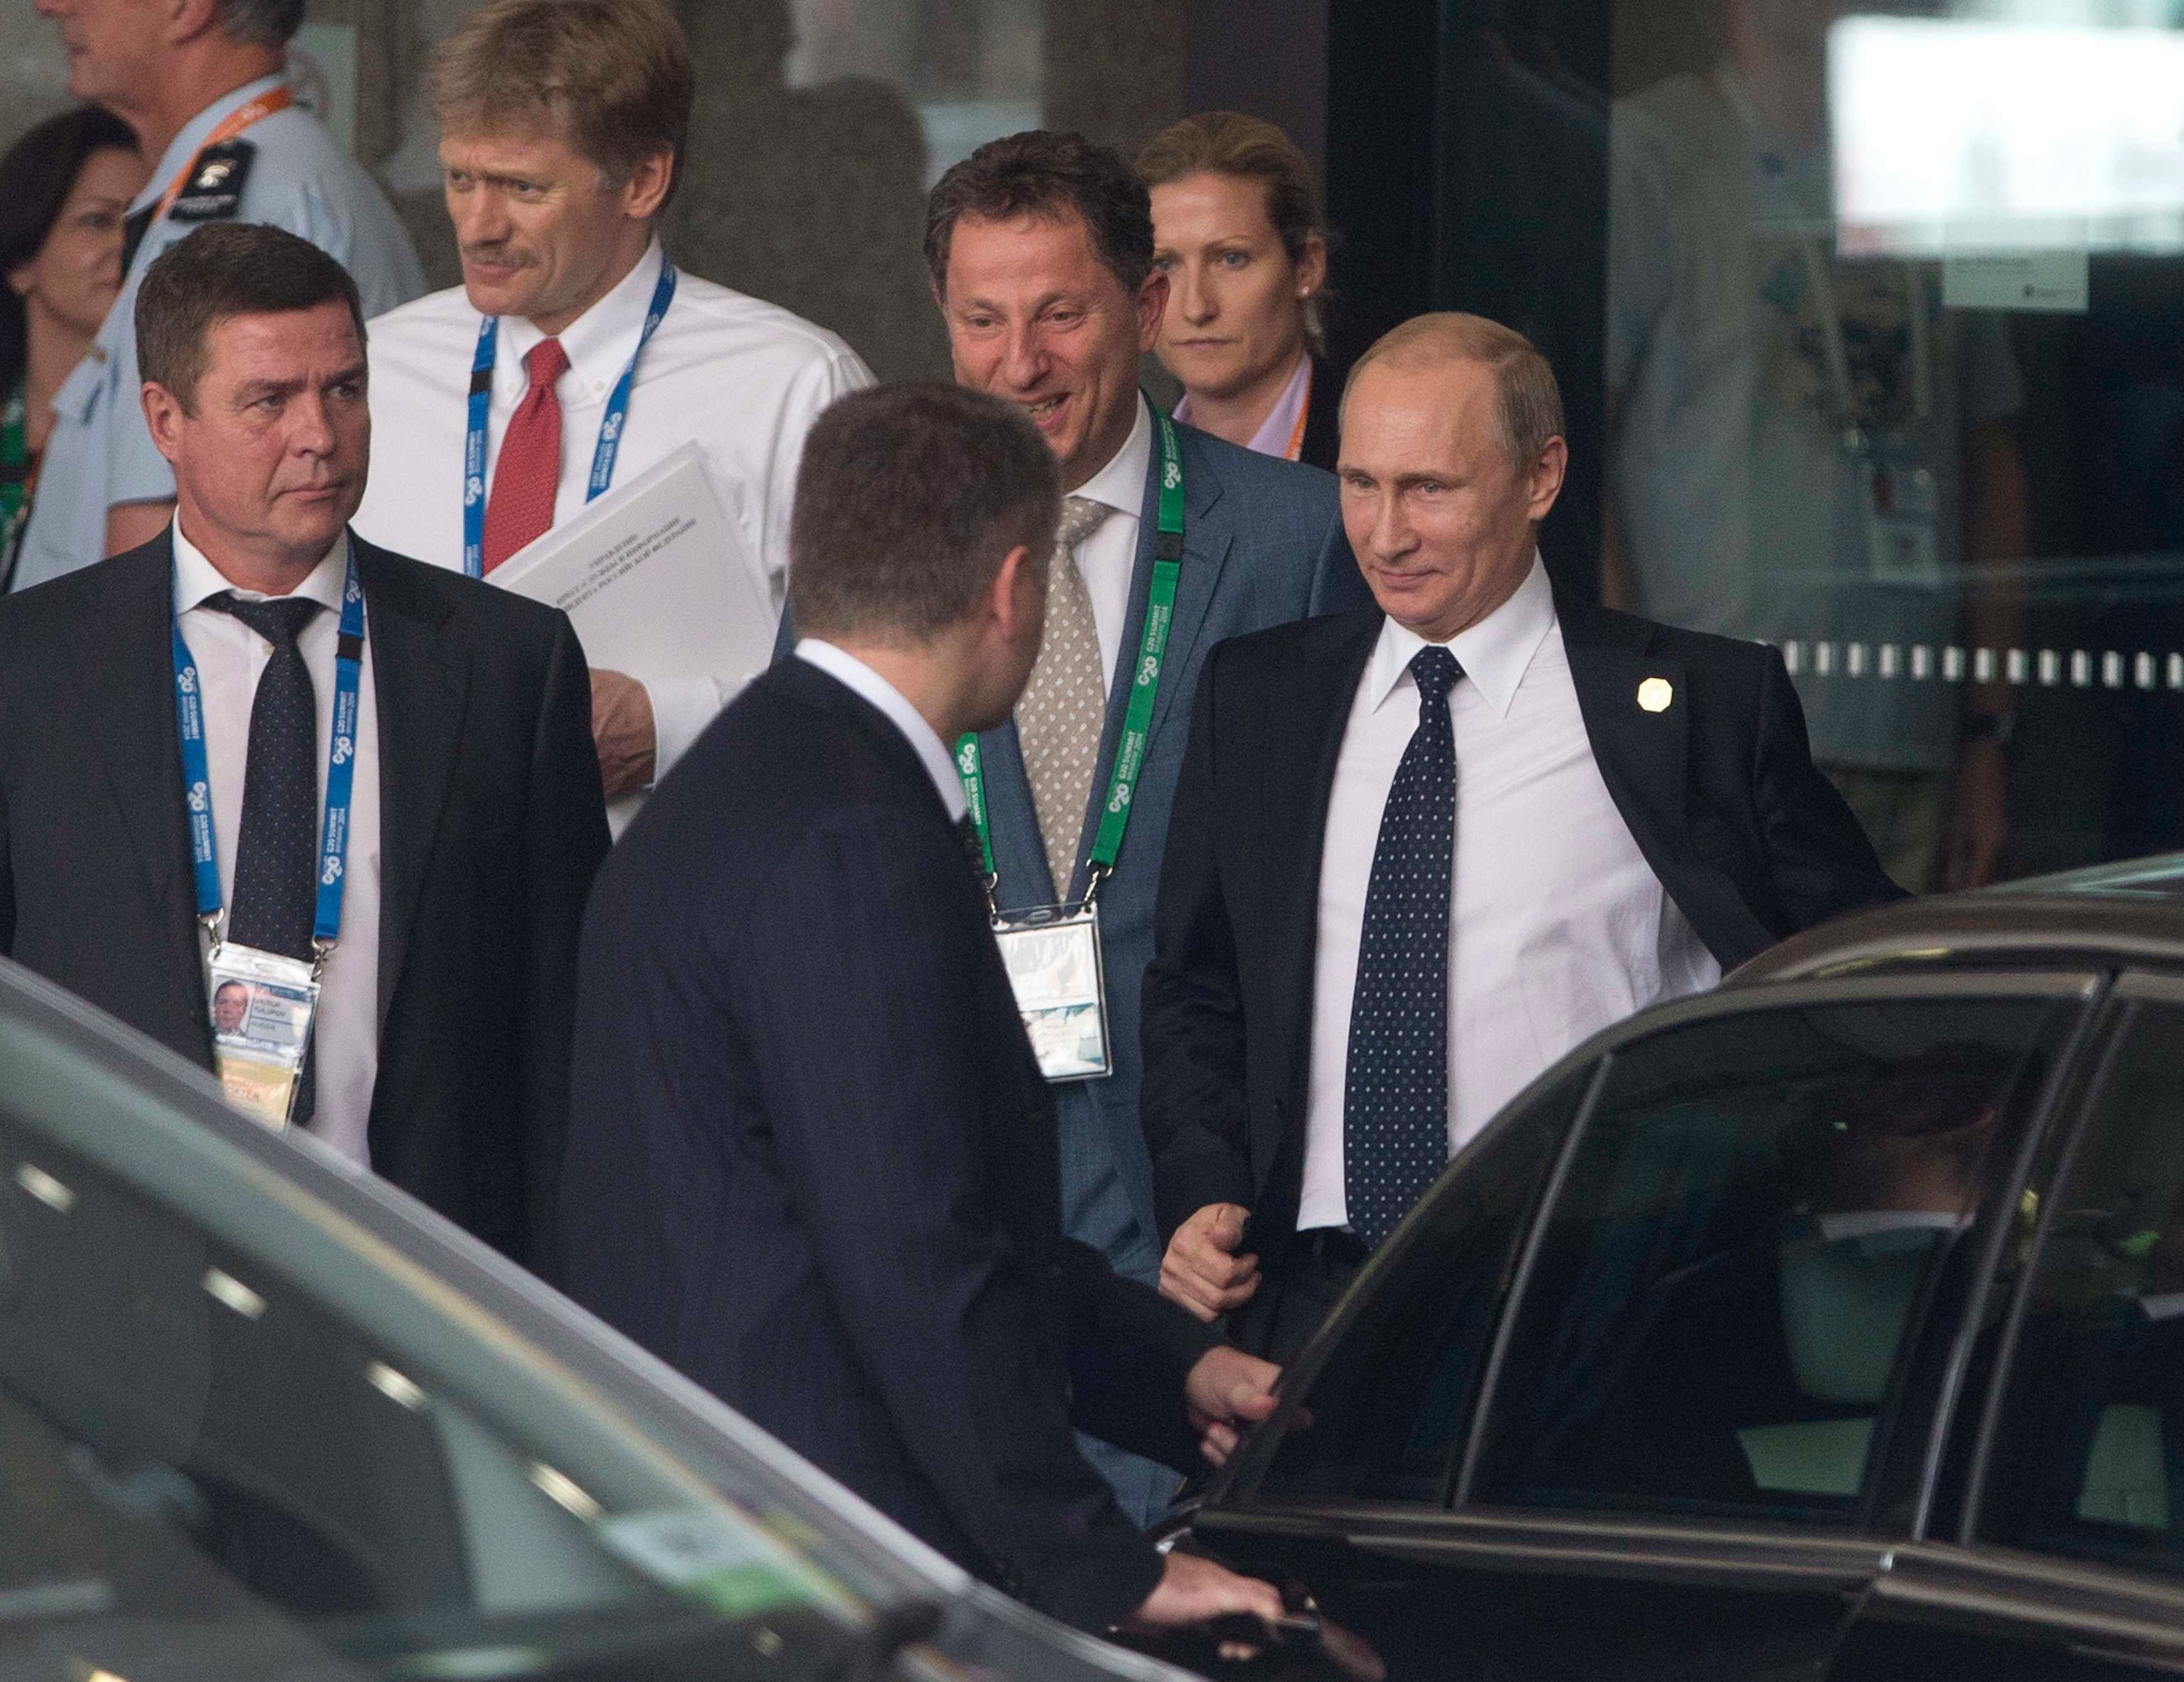 Russian President Vladimir Putin takes off his jacket as he leaves his hotel en route to Brisbane Airport as he leaves the G20 leaders summit early, November 16, 2014. Photo: Reuters